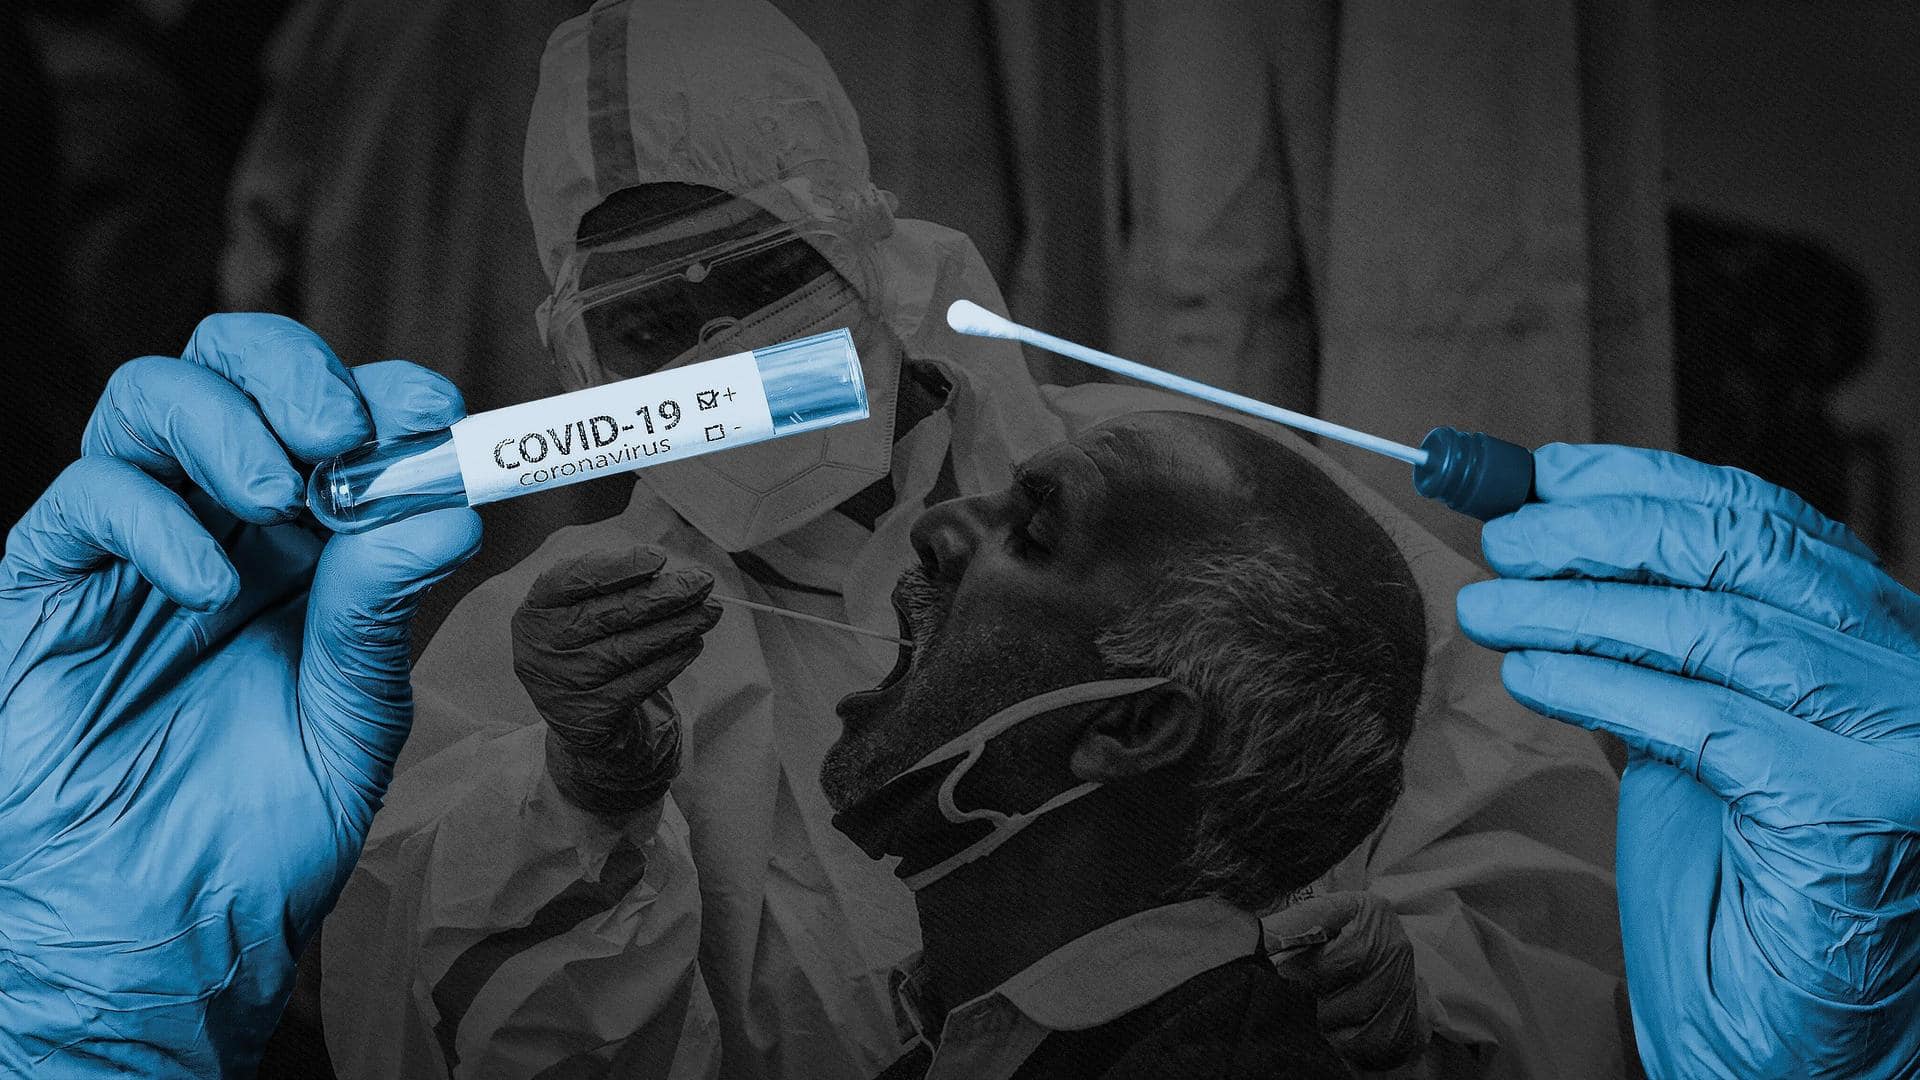 India records over 7,600 new COVID-19 cases, 11 deaths